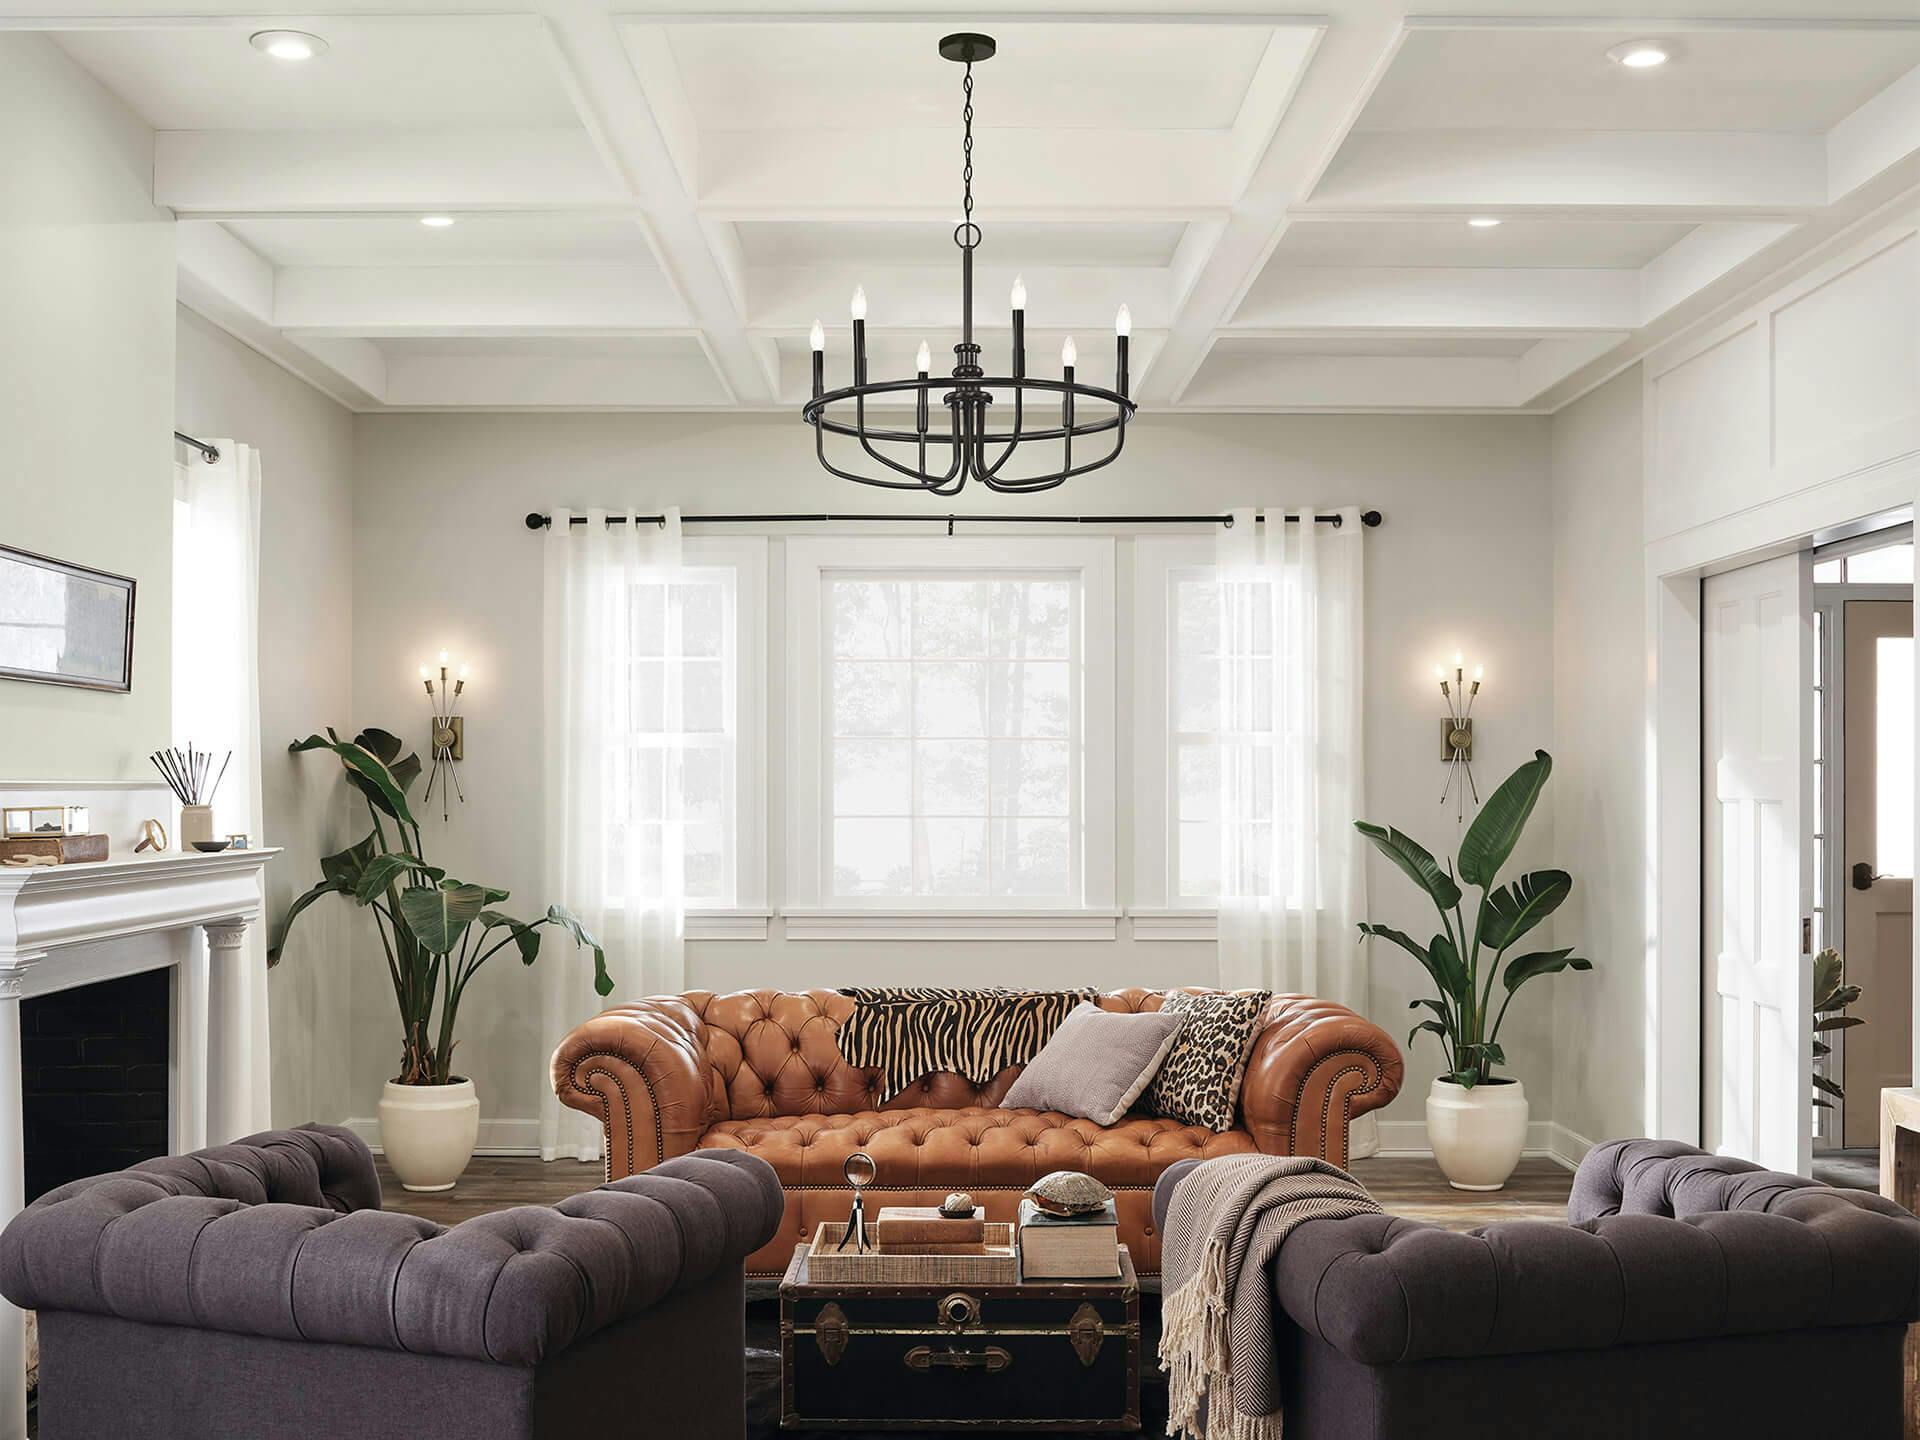 Living room with Doncaster chandelier in center